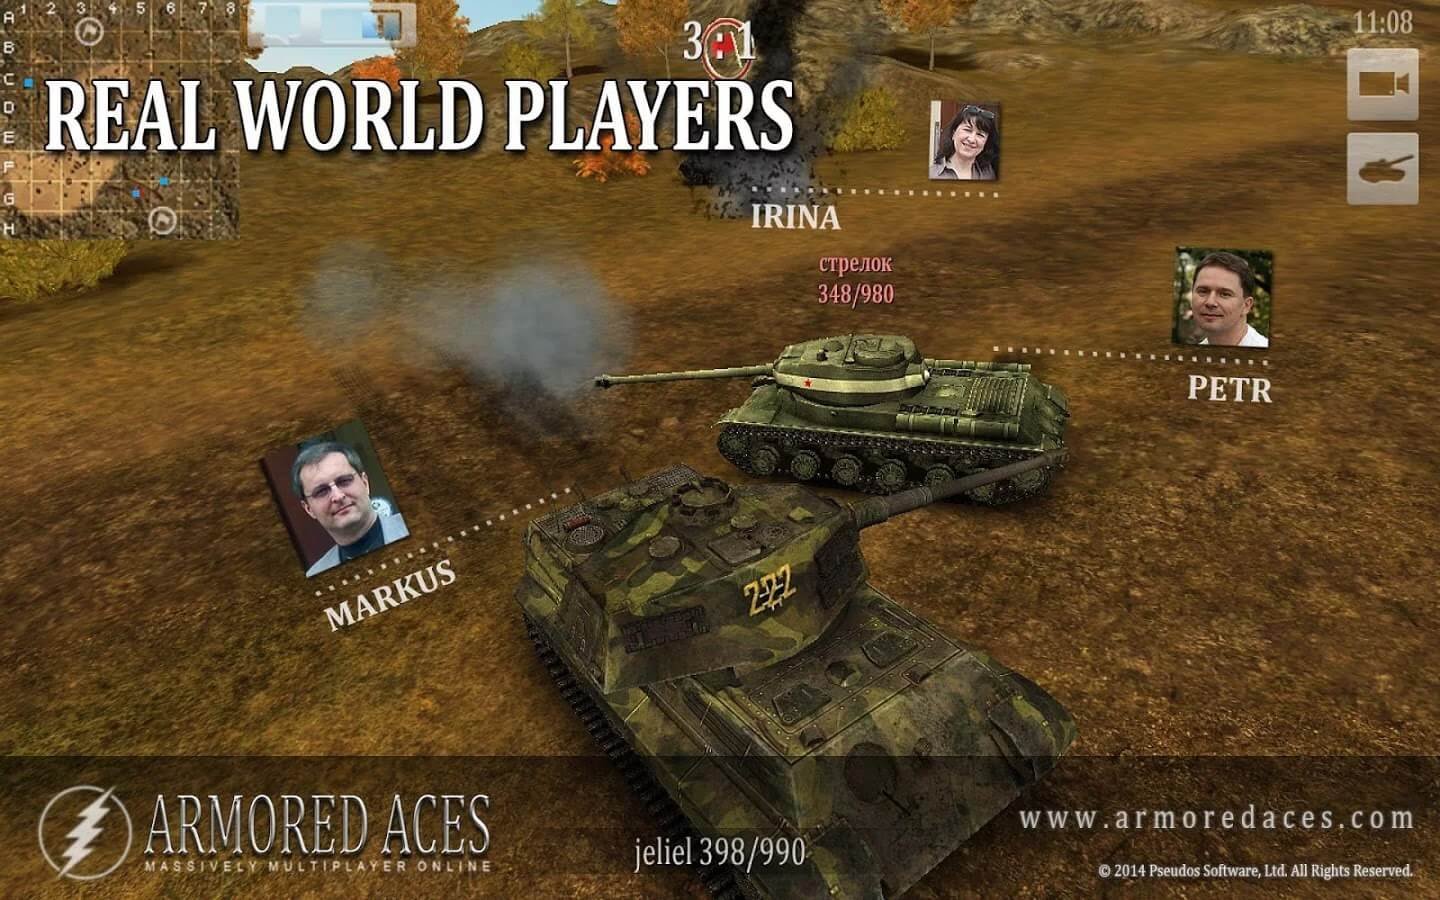  Armored Aces  Android  3D  